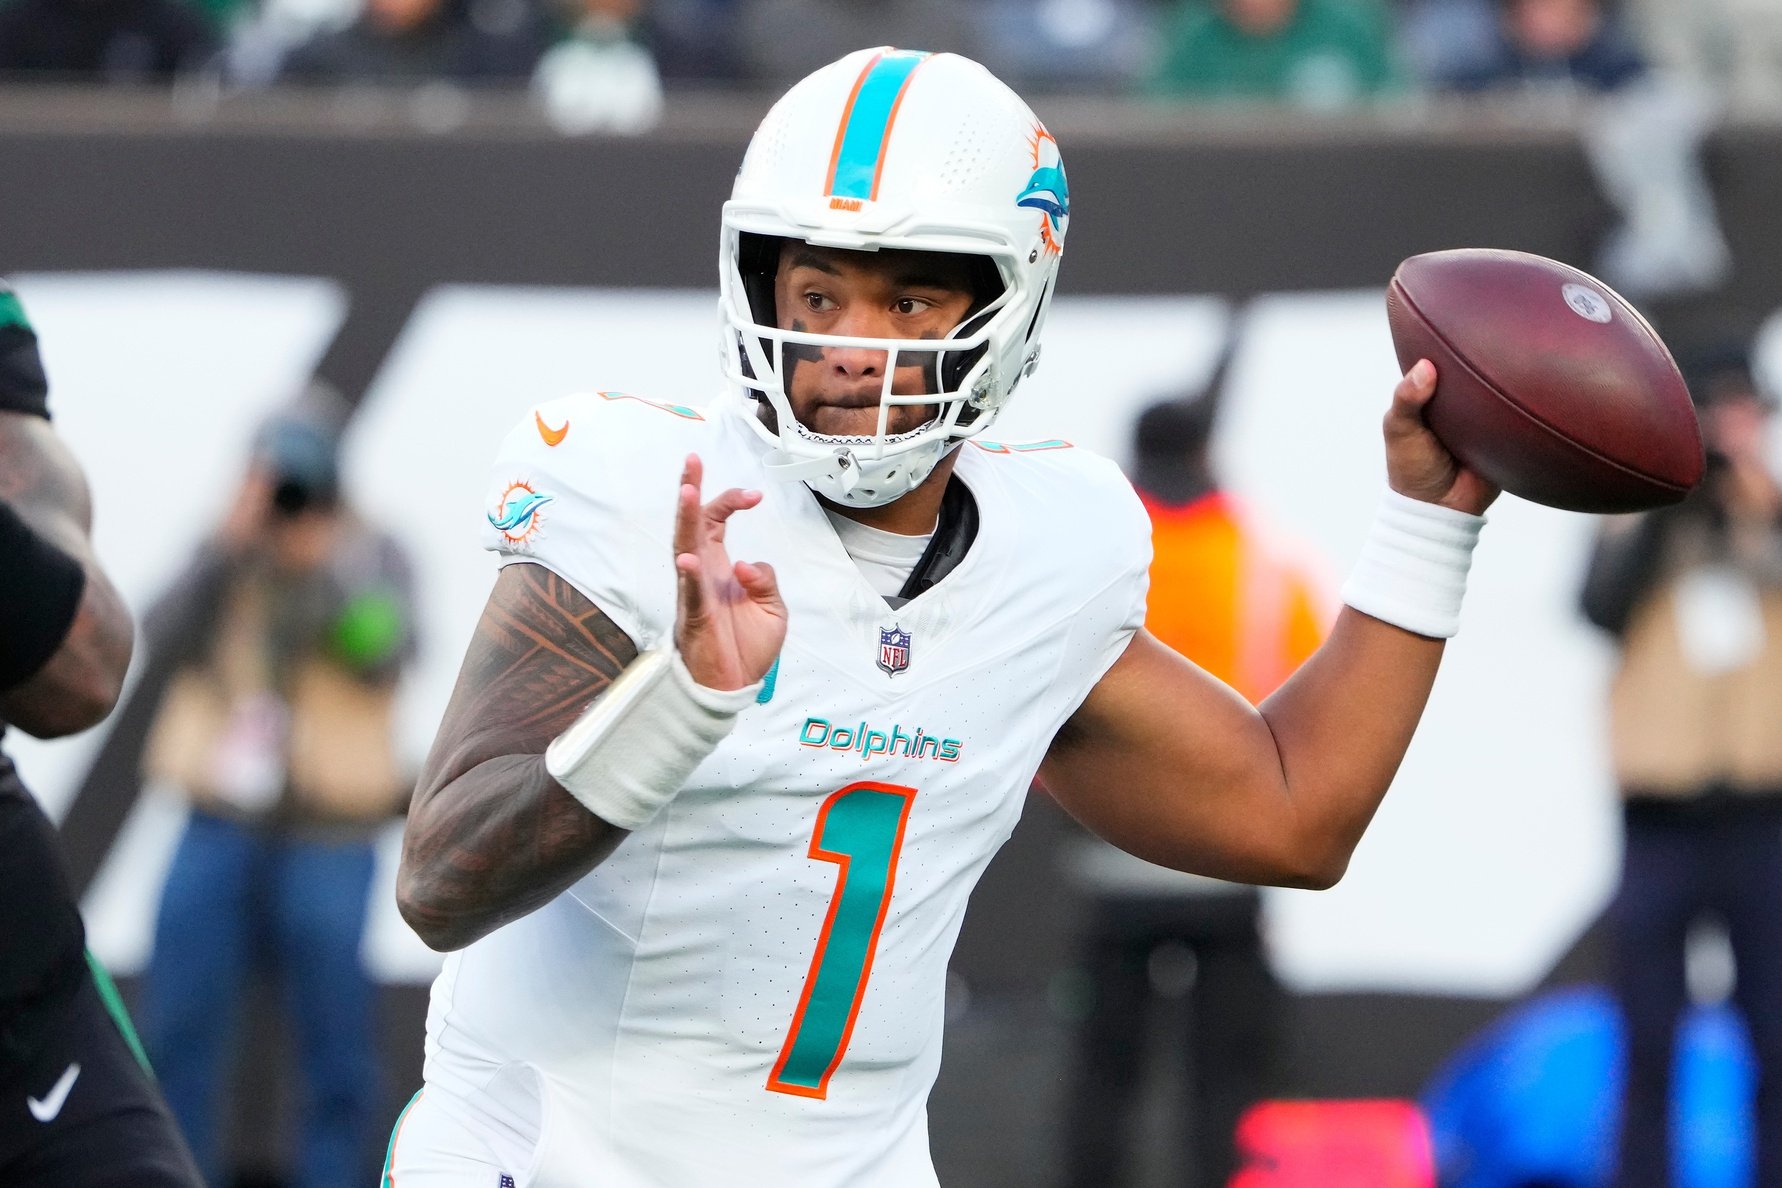 Miami Dolphins quarterback Tua Tagovailoa (1) throws a pass during the game against the New York Jets at MetLife Stadium.